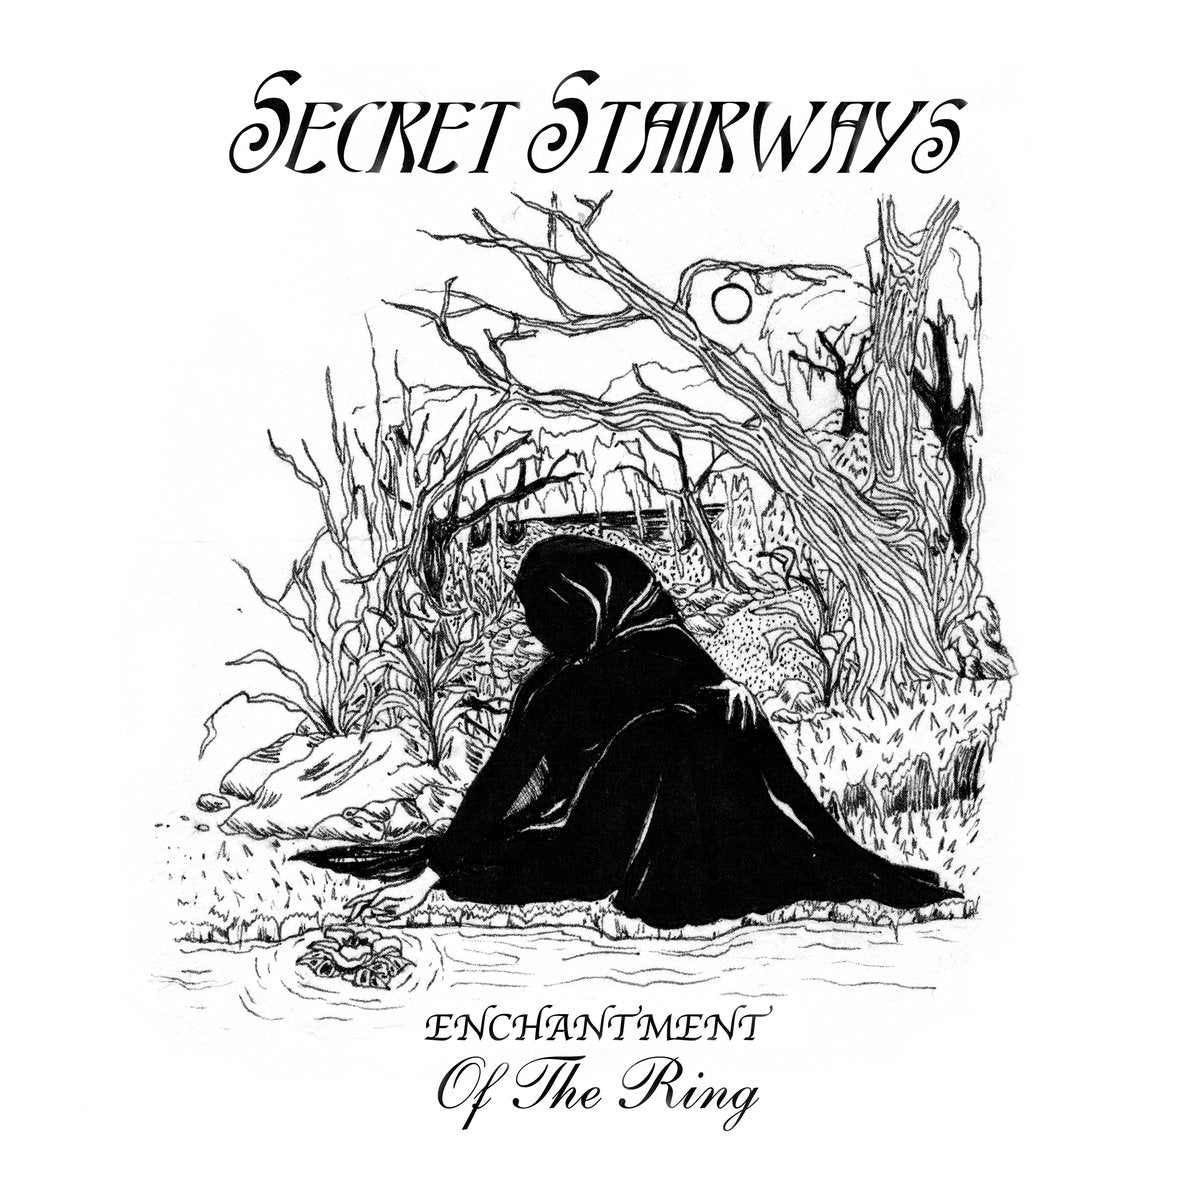 [SOLD OUT] SECRET STAIRWAYS "Enchantment Of The Ring" vinyl LP (color)